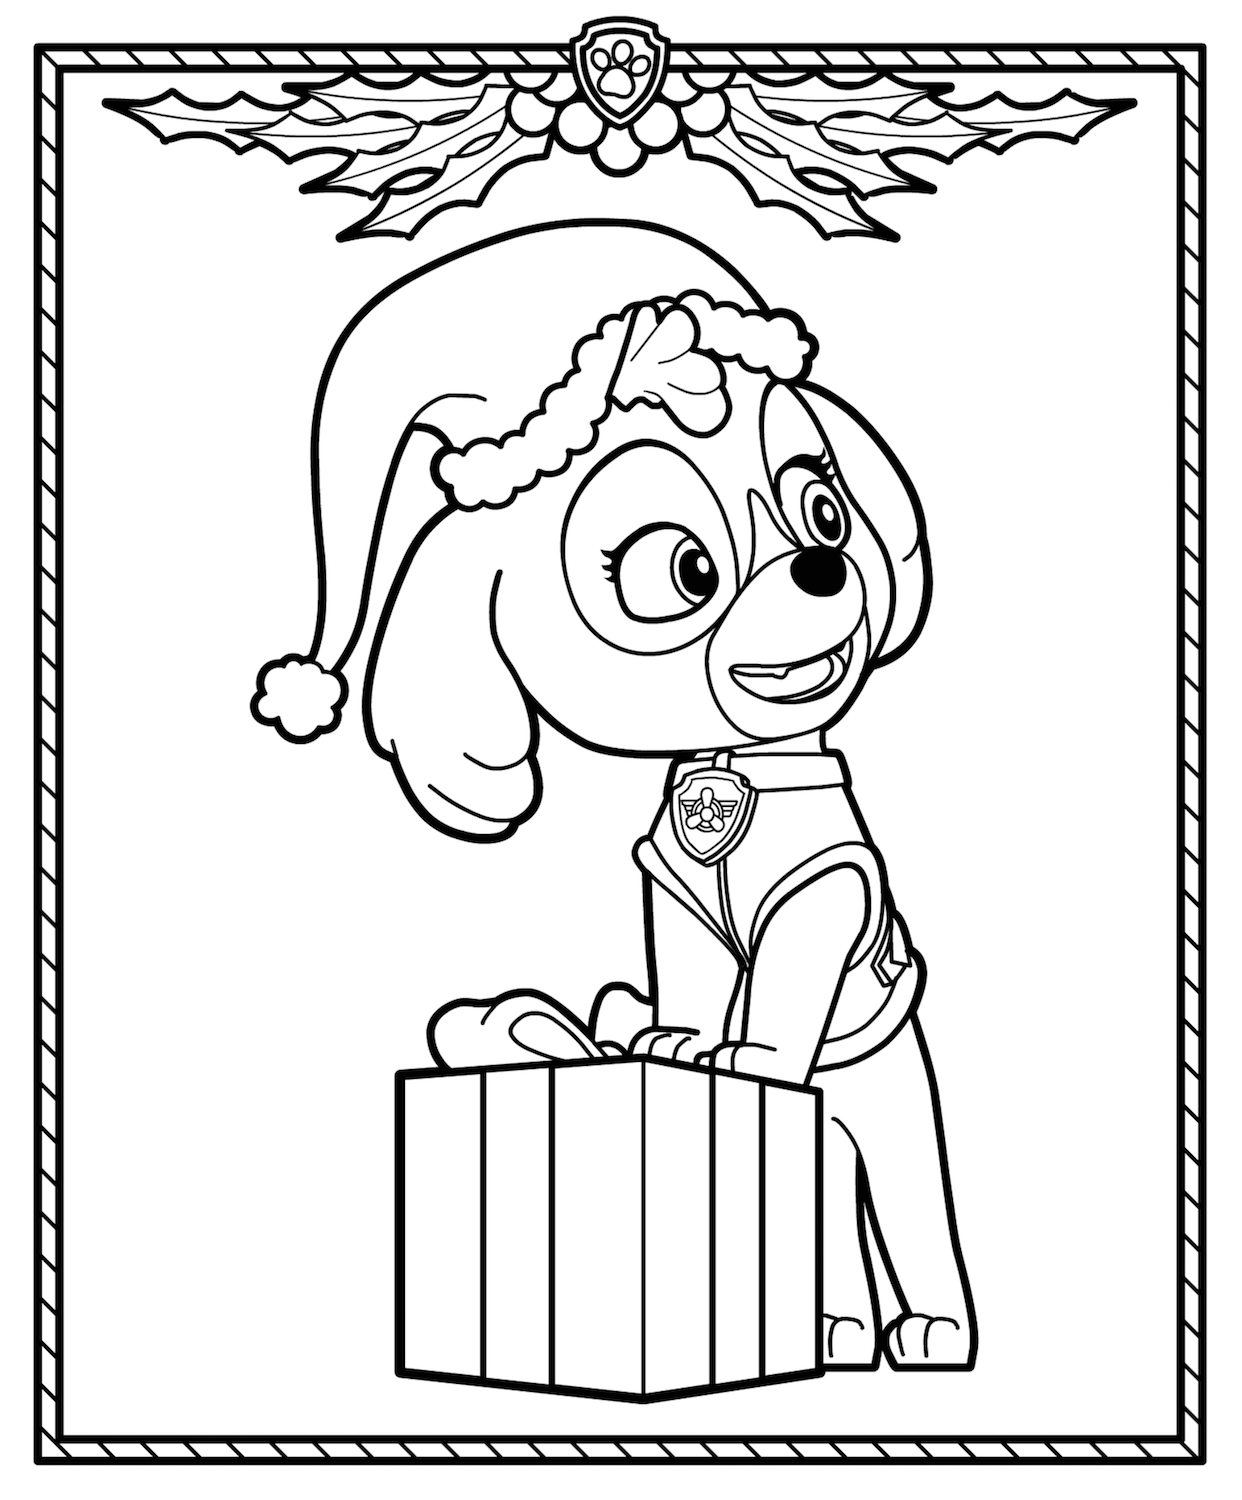 Paw Patrol Christmas Coloring Pages At Sketch Coloring Page